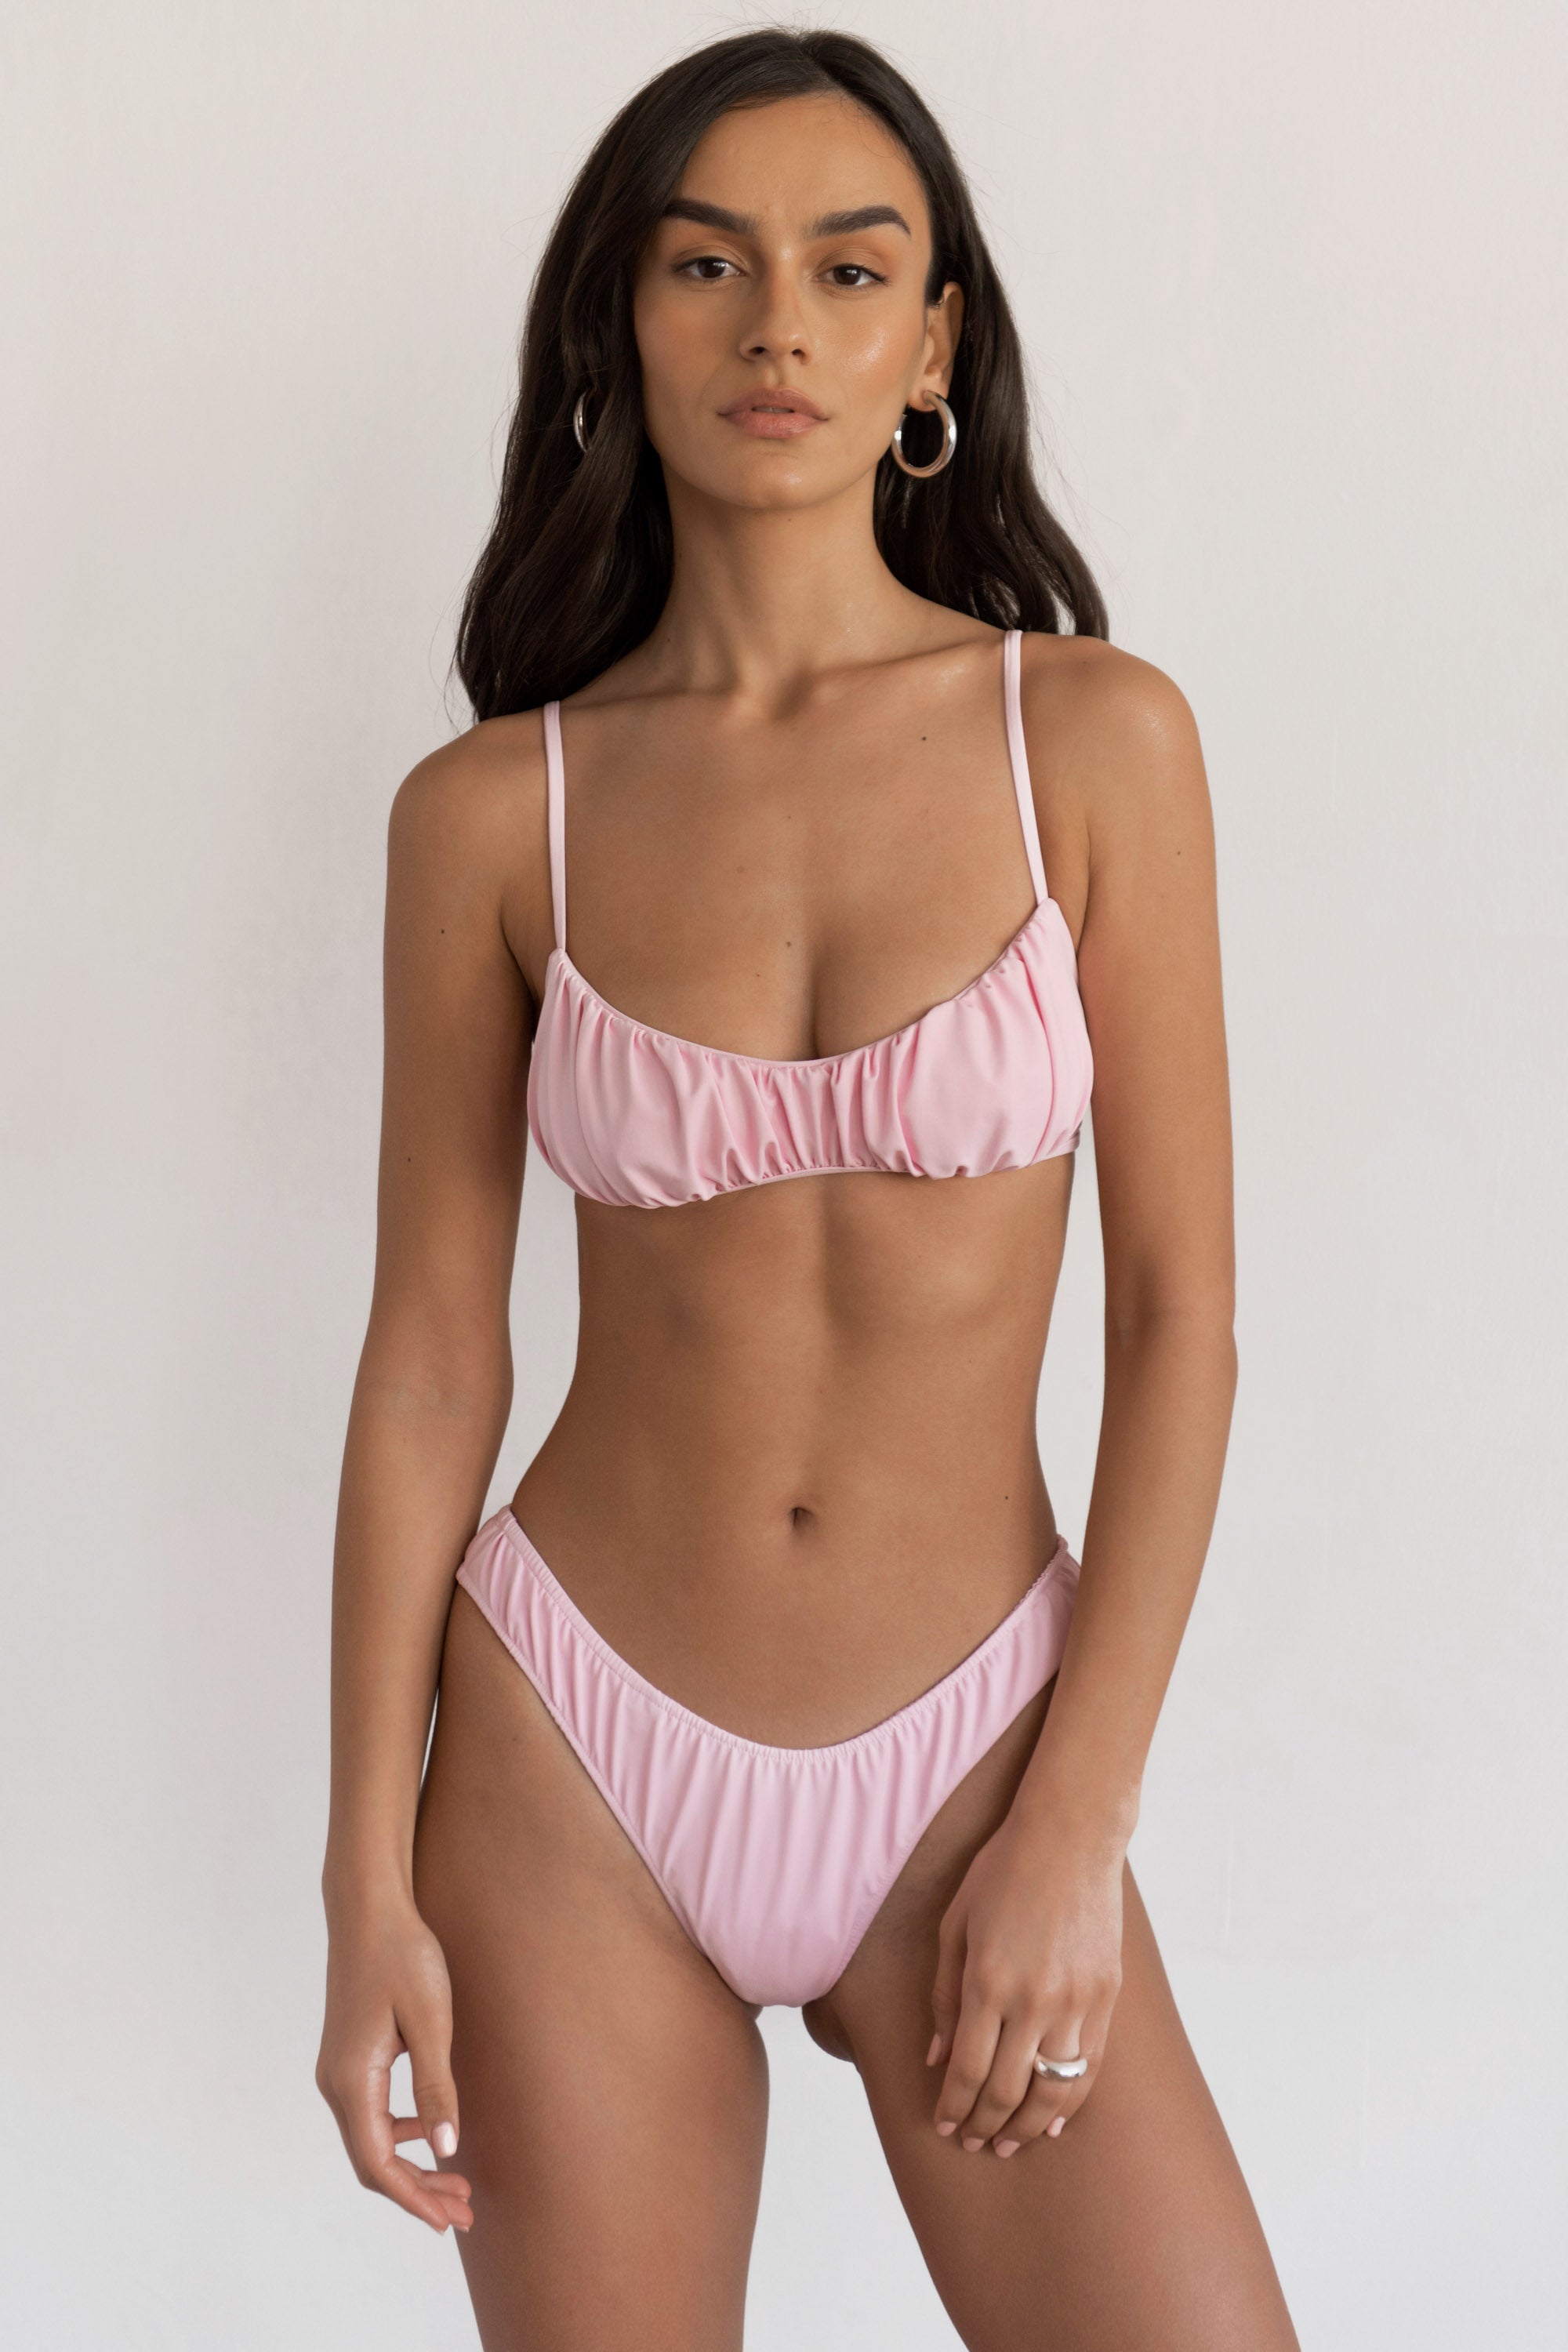 Twin Strap Bra Bikini With Bow Detail in Peach Crinkle / Adjustable Low or  High Rise Super Flattering Fit 